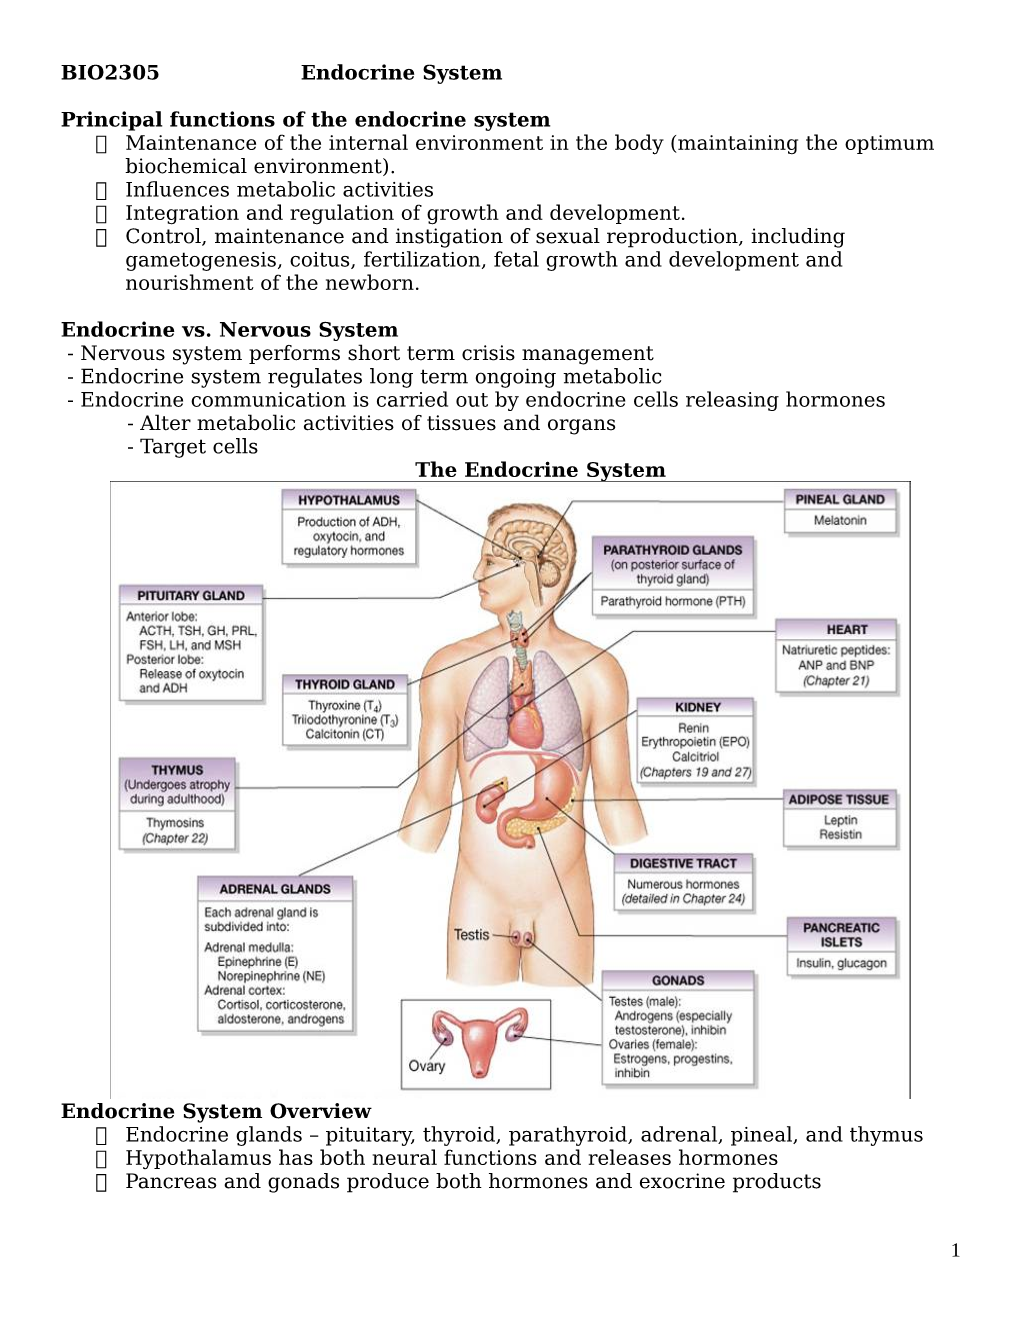 BIO2305 Endocrine System Principal Functions of The